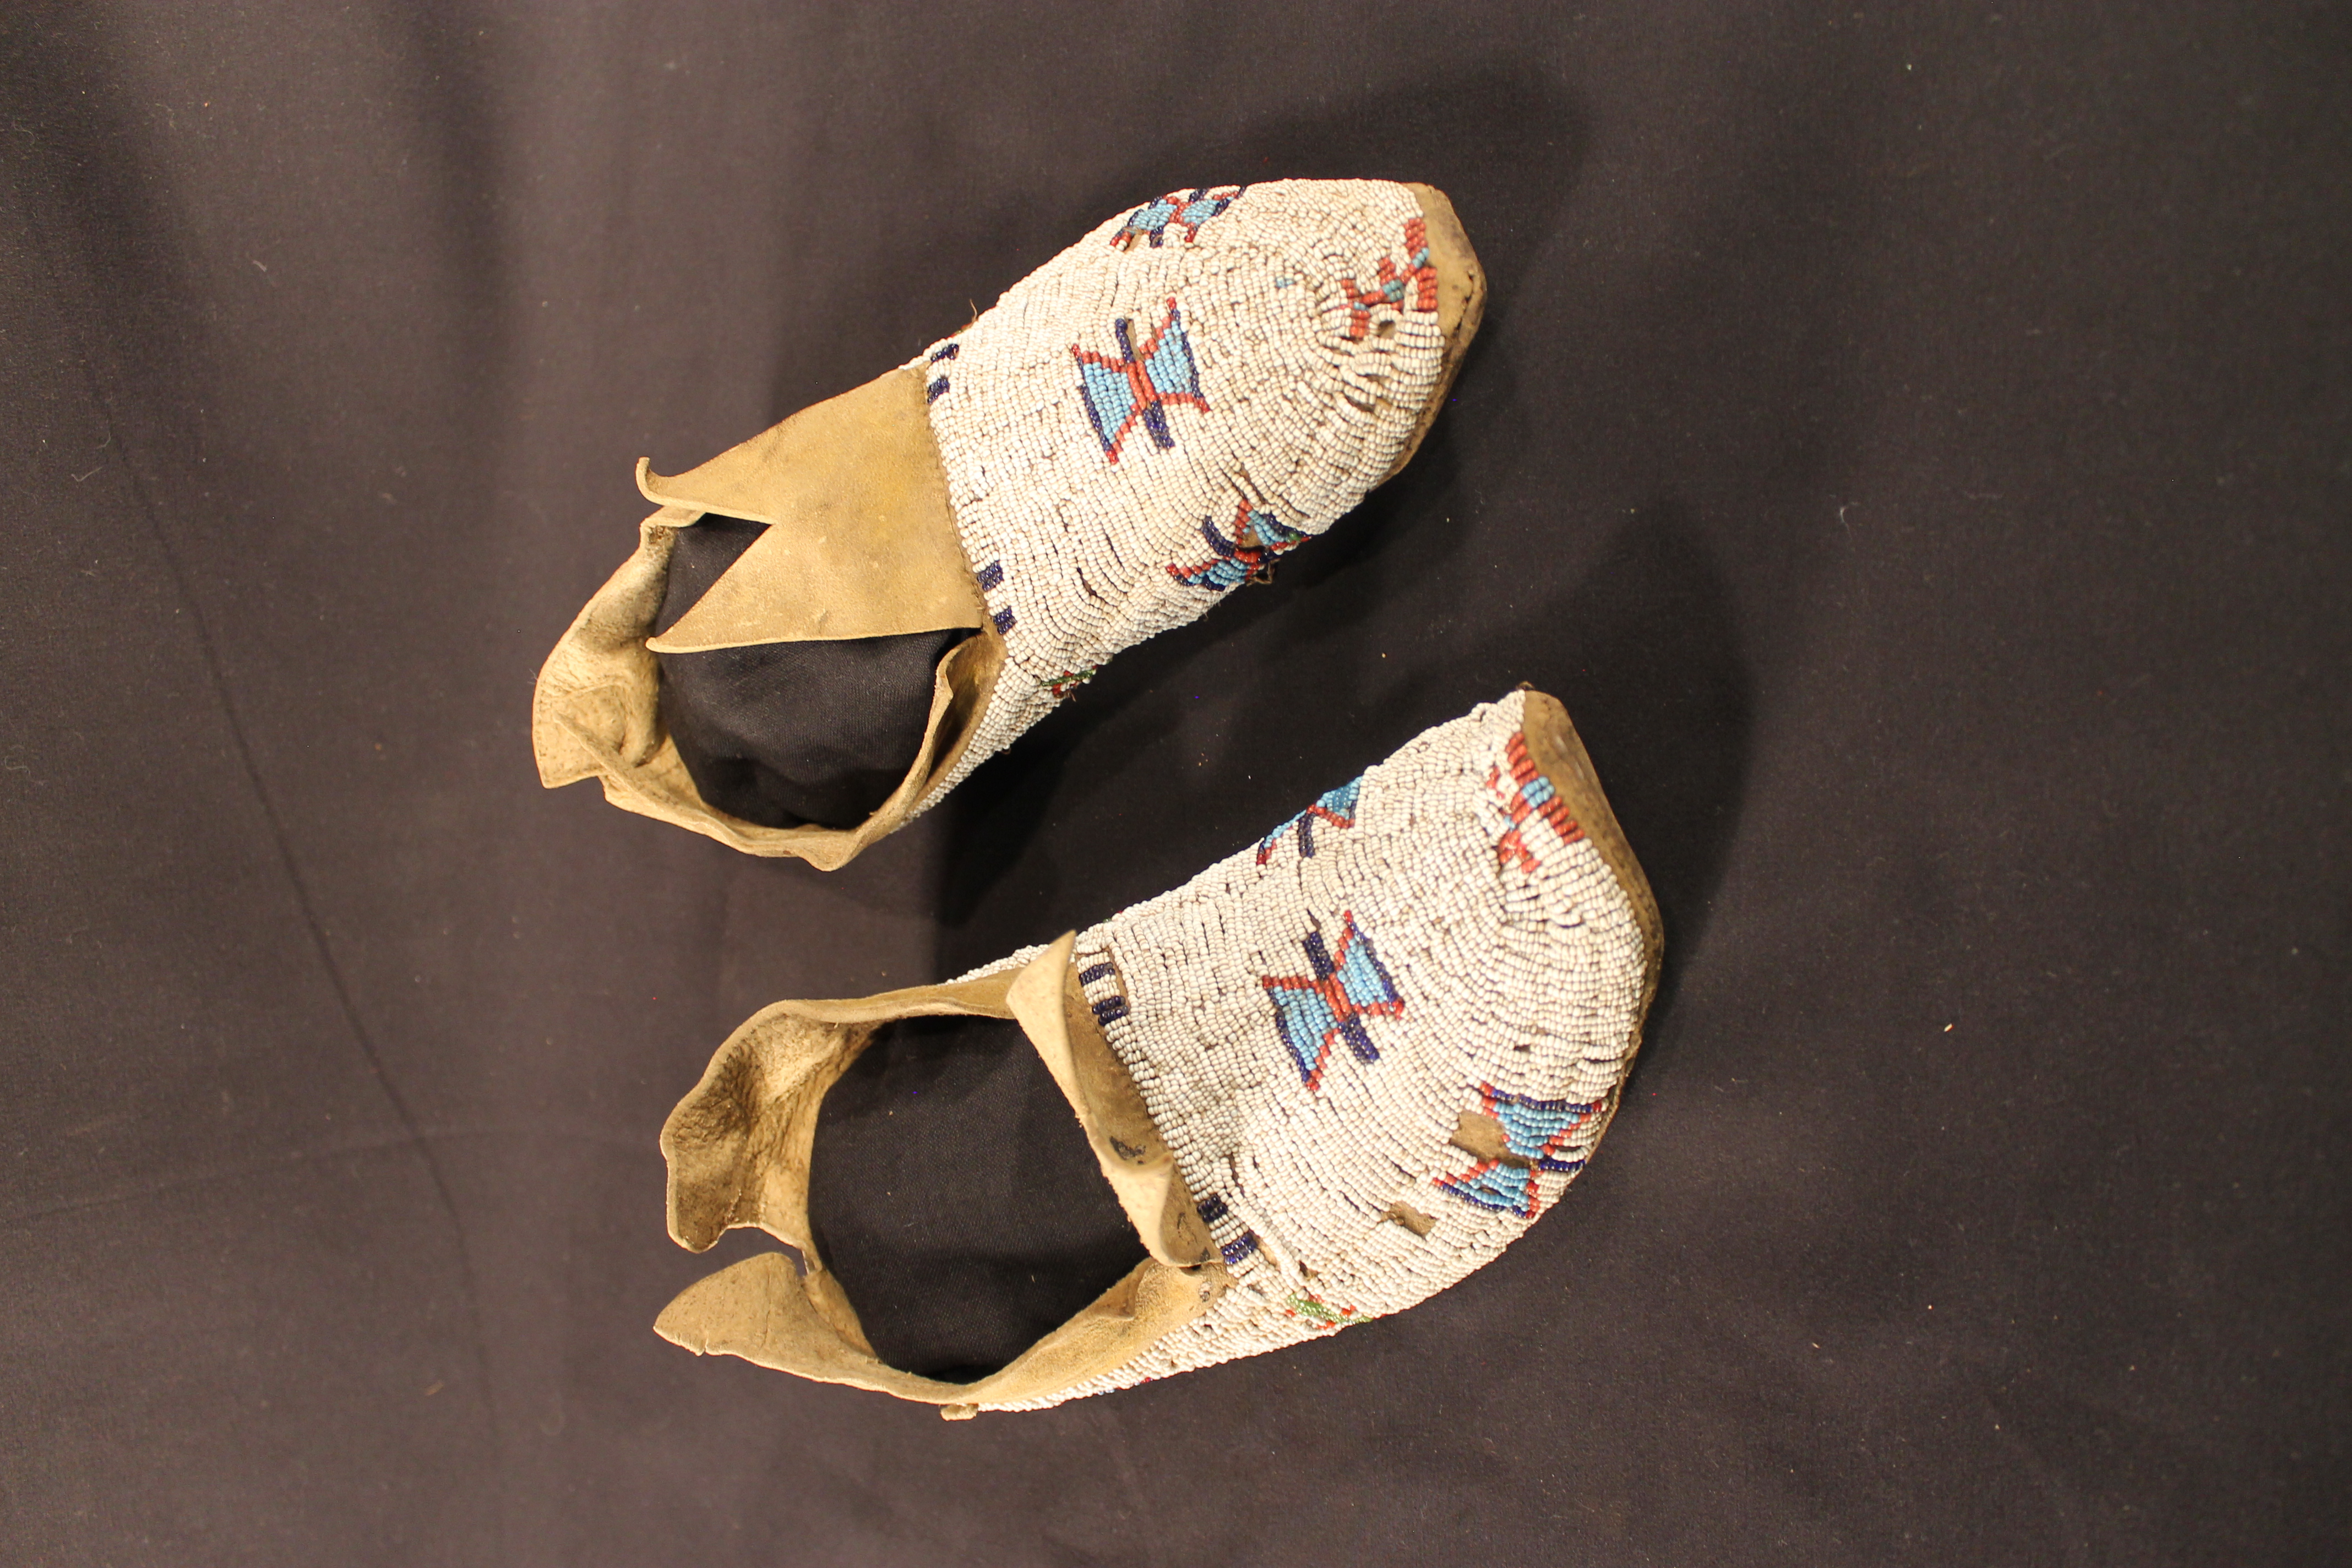 Beaded shoes with a pattern featuring two blue triangles outlined with red beads connected together with a black beaded bar. The remainder of the design is filled in with white beads. The upper portion of the shoe is exposed tan hide. 